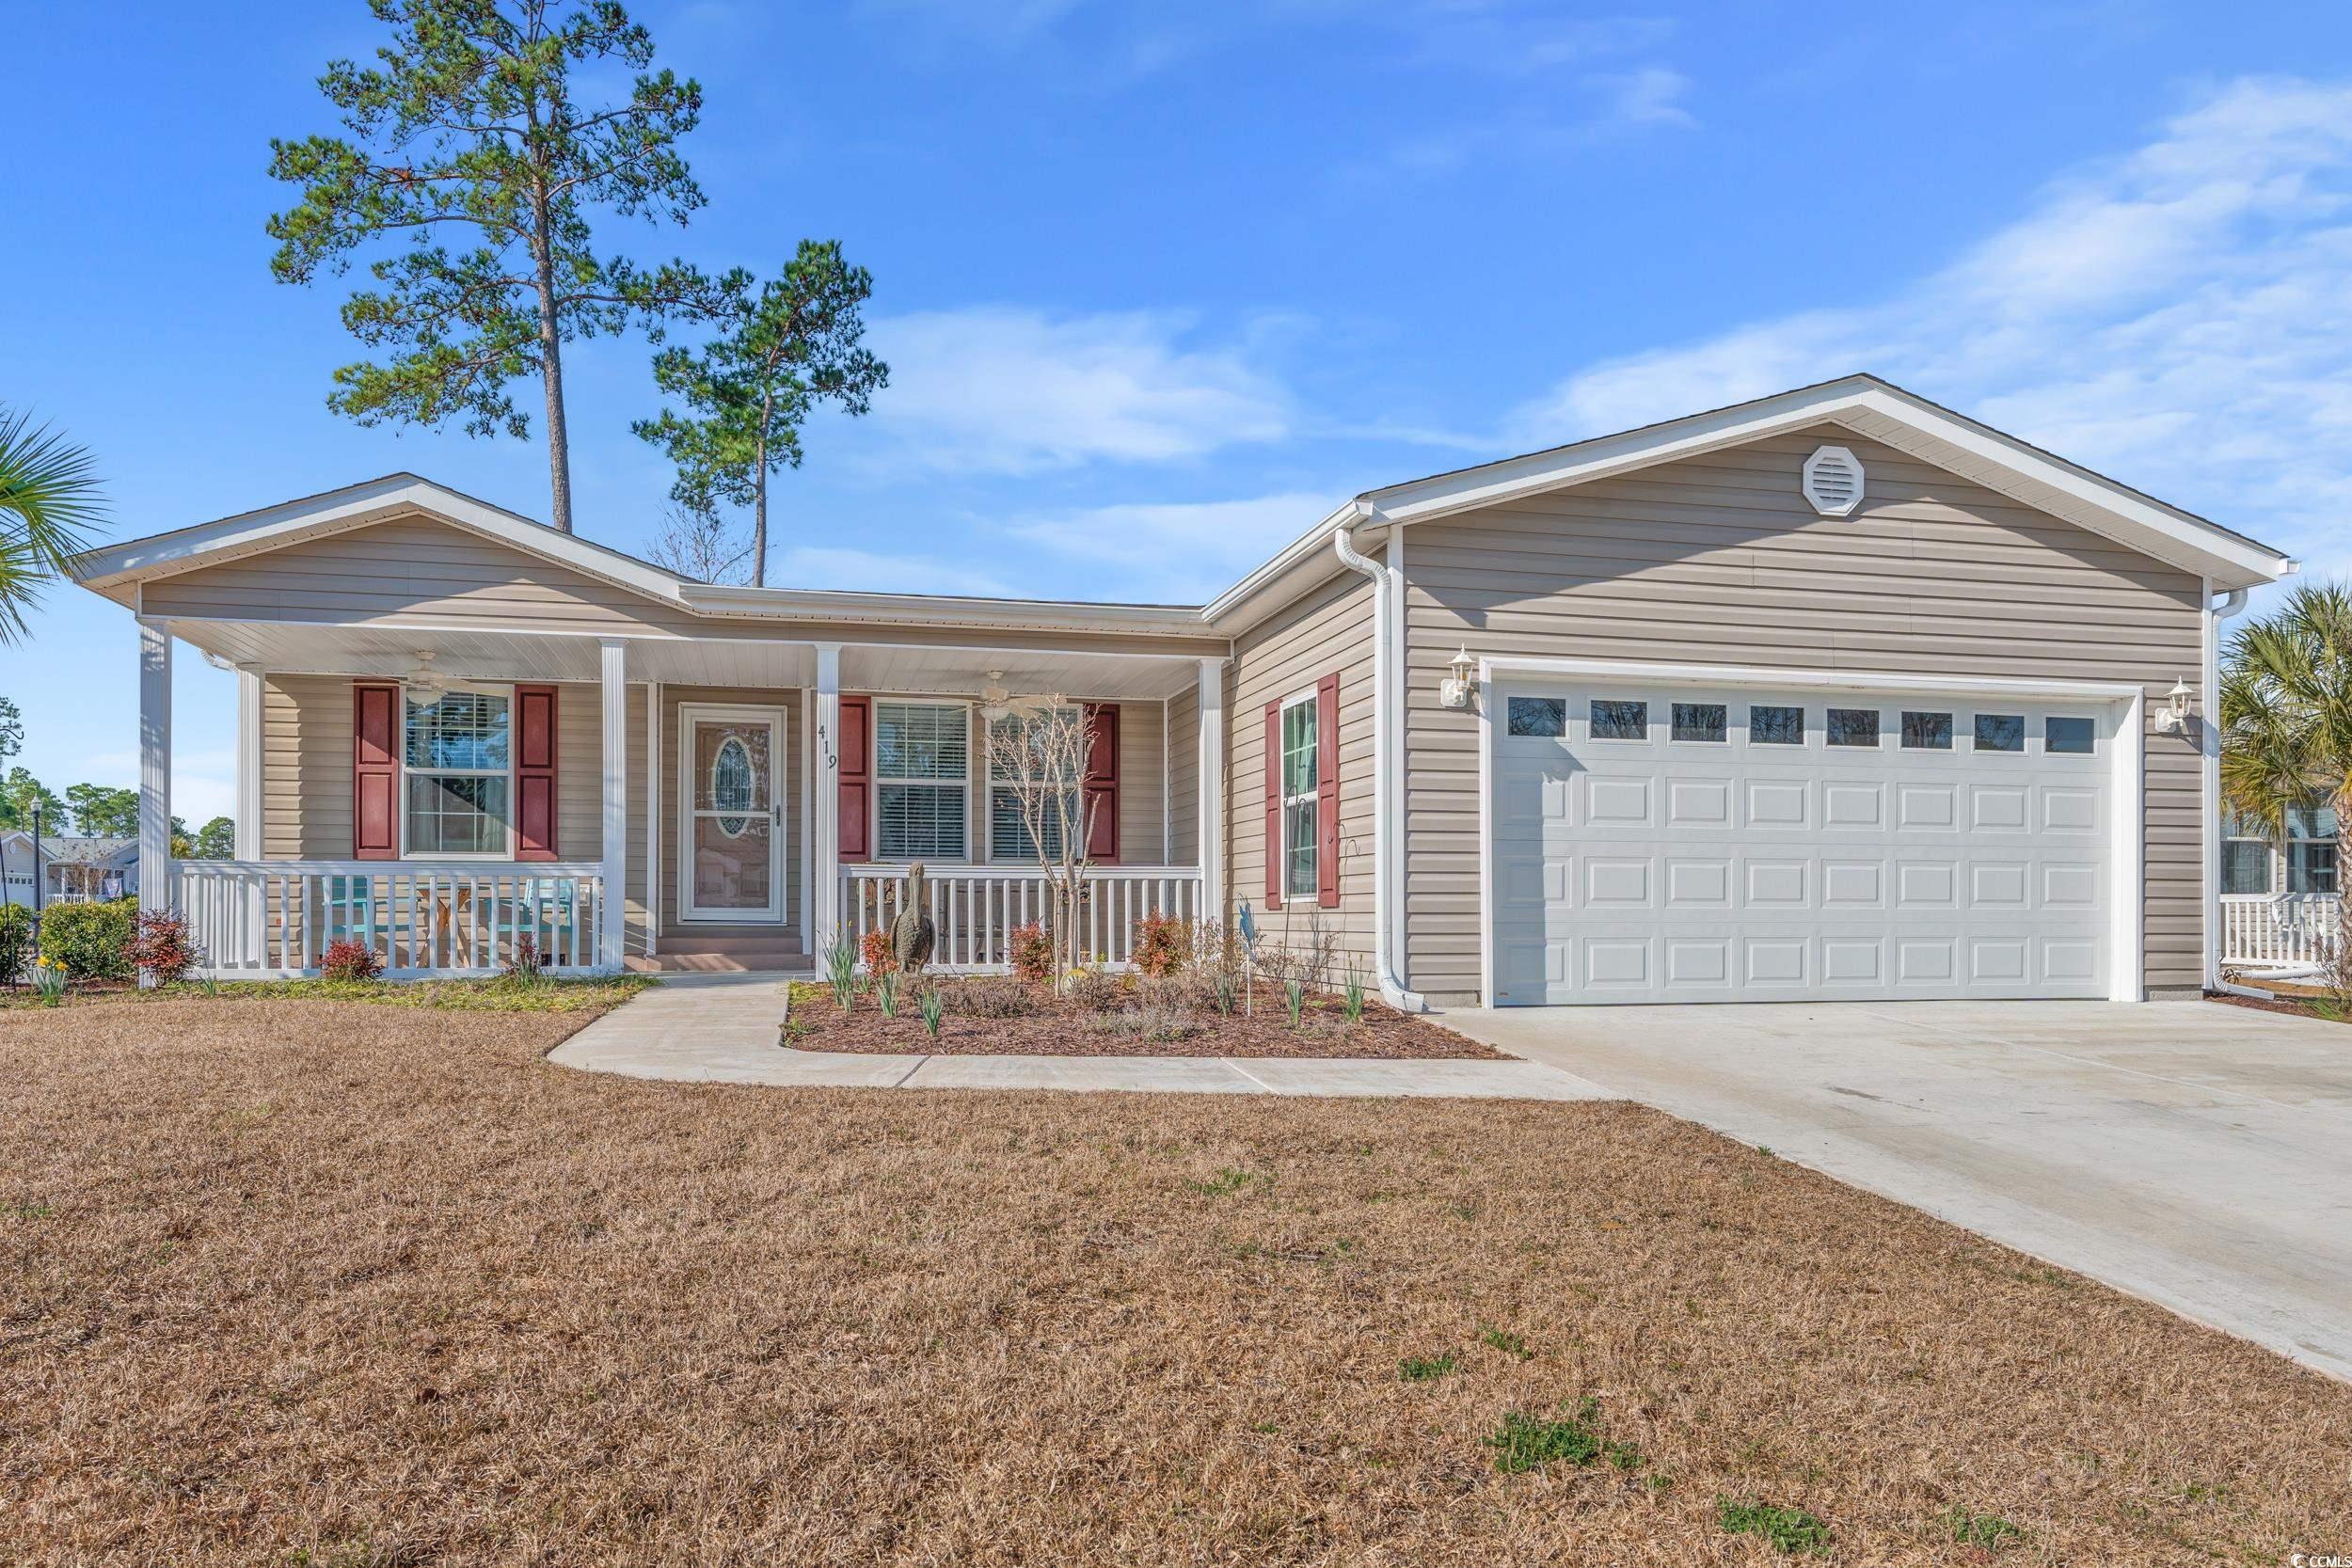 419 Lakeside Crossing Dr., Conway, SC 29526